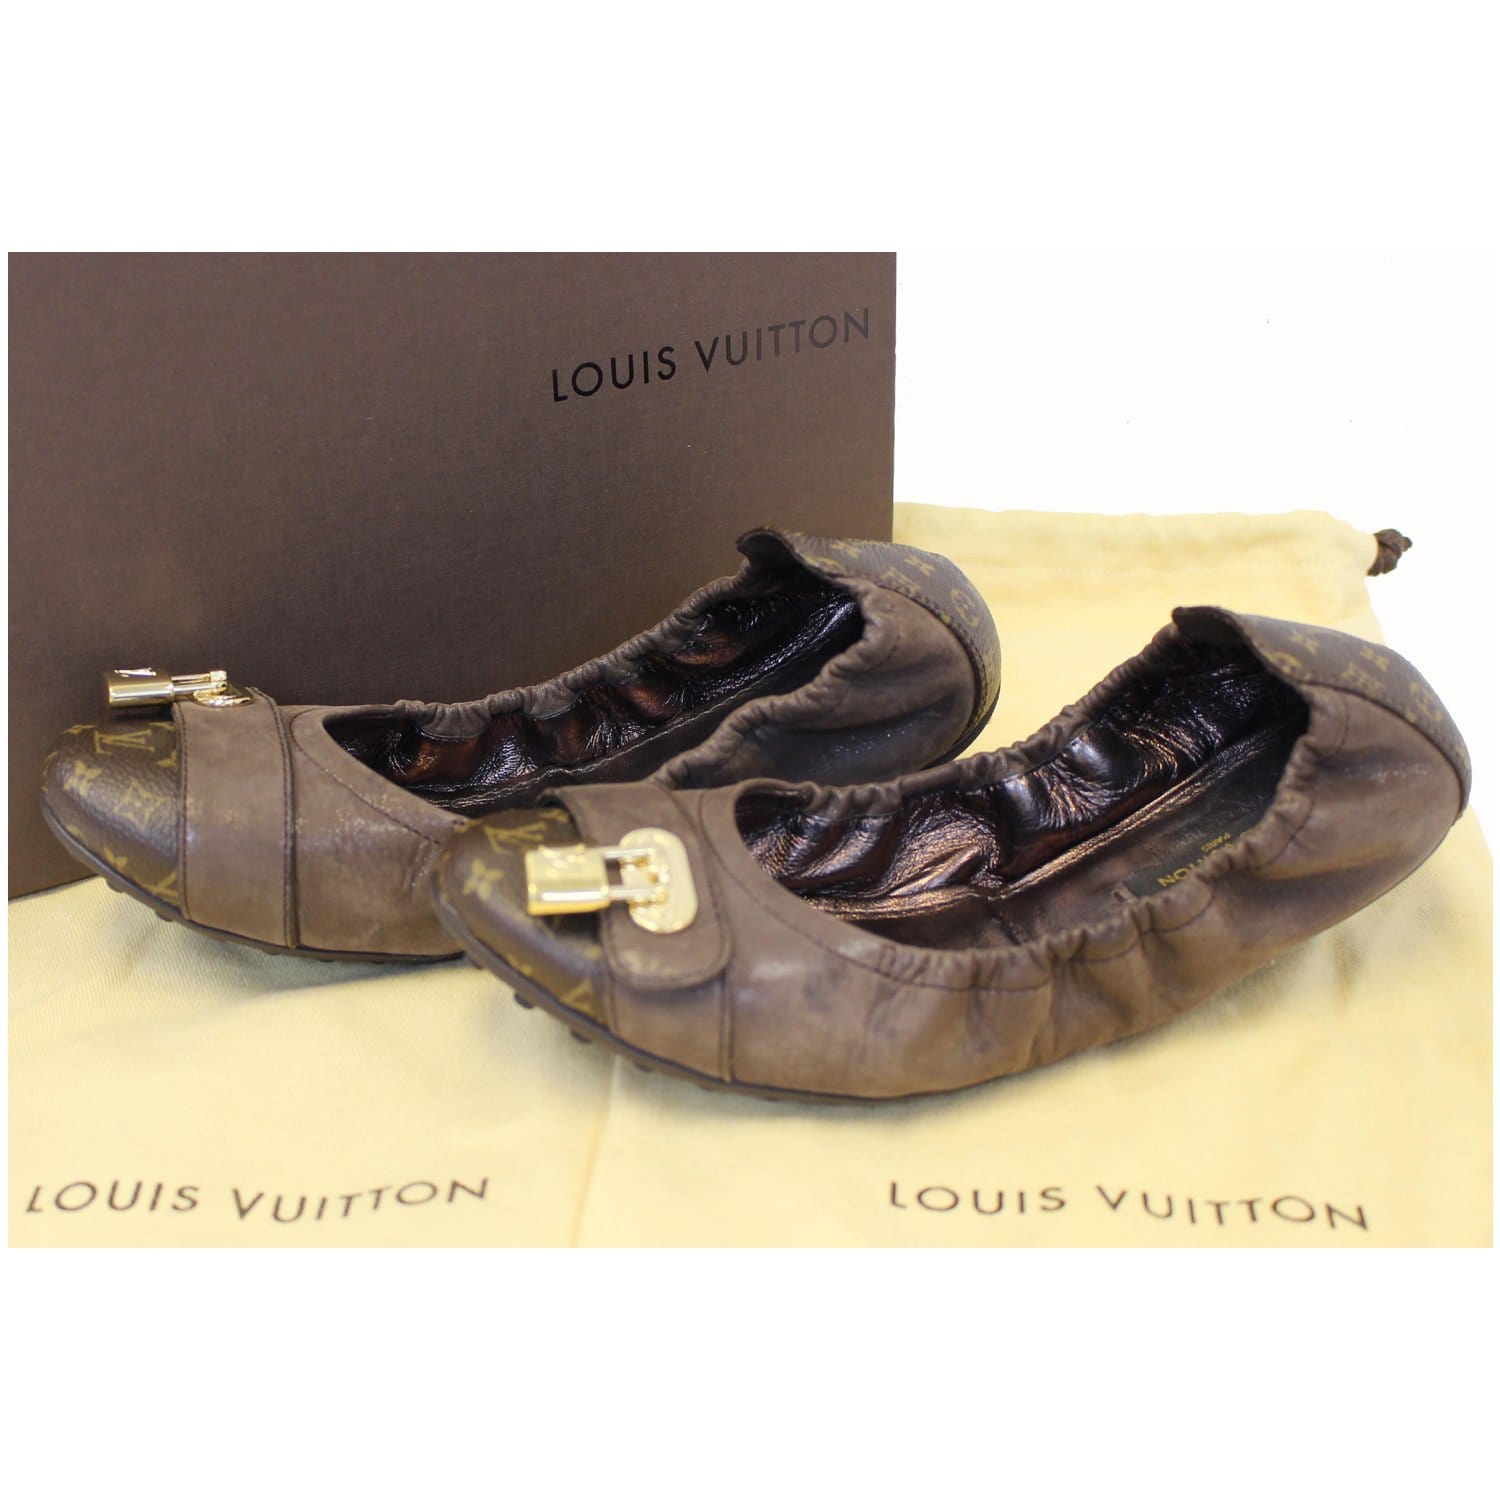 Academy leather flats Louis Vuitton Brown size 39 EU in Leather